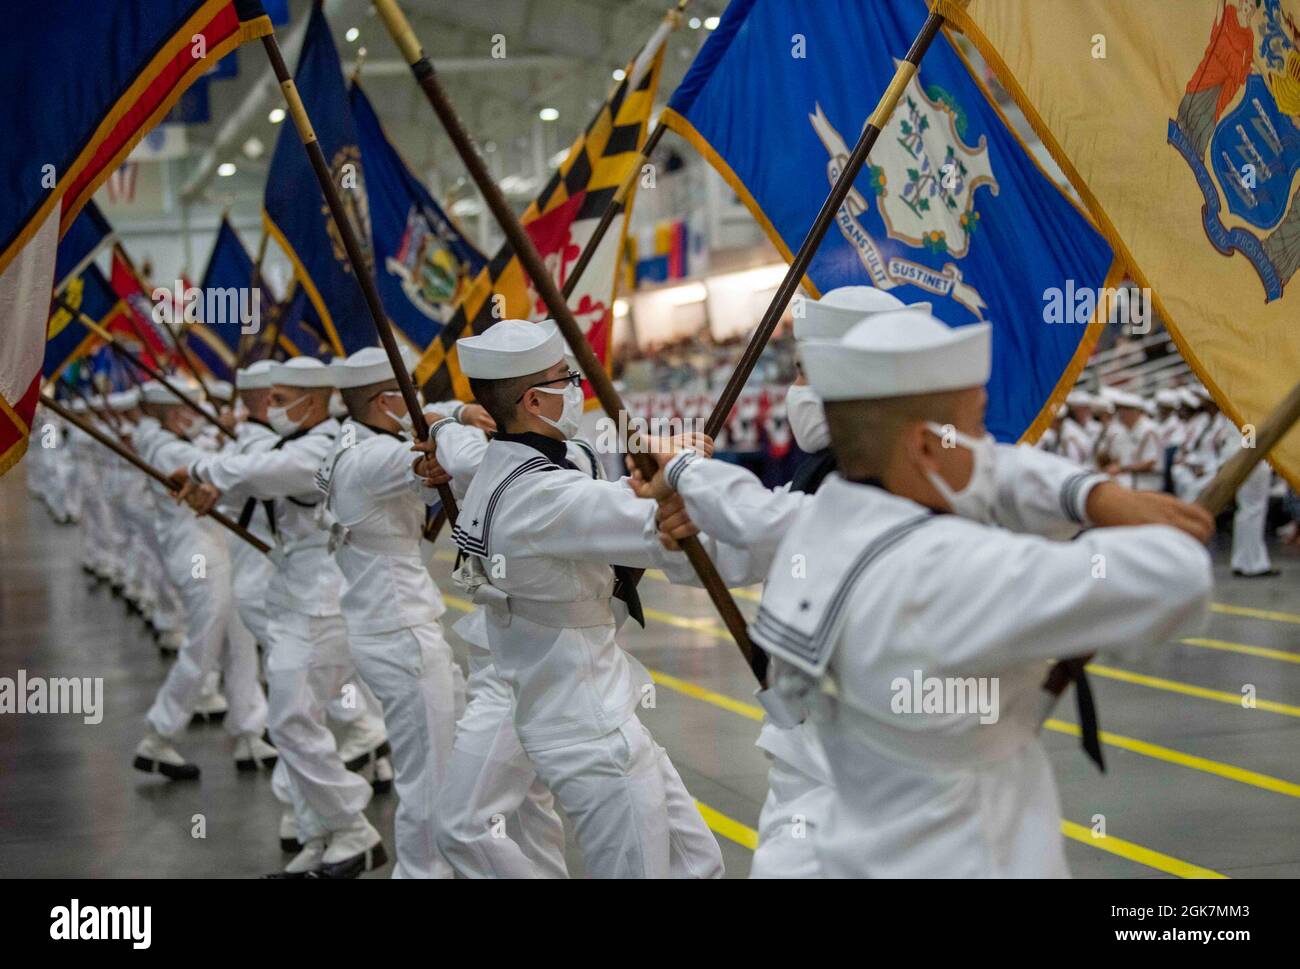 Performance division recruits carrying state flags march on the drill deck during a pass-in-review graduation ceremony at Recruit Training Command. More than 40,000 recruits train annually at the Navy's only boot camp. Stock Photo